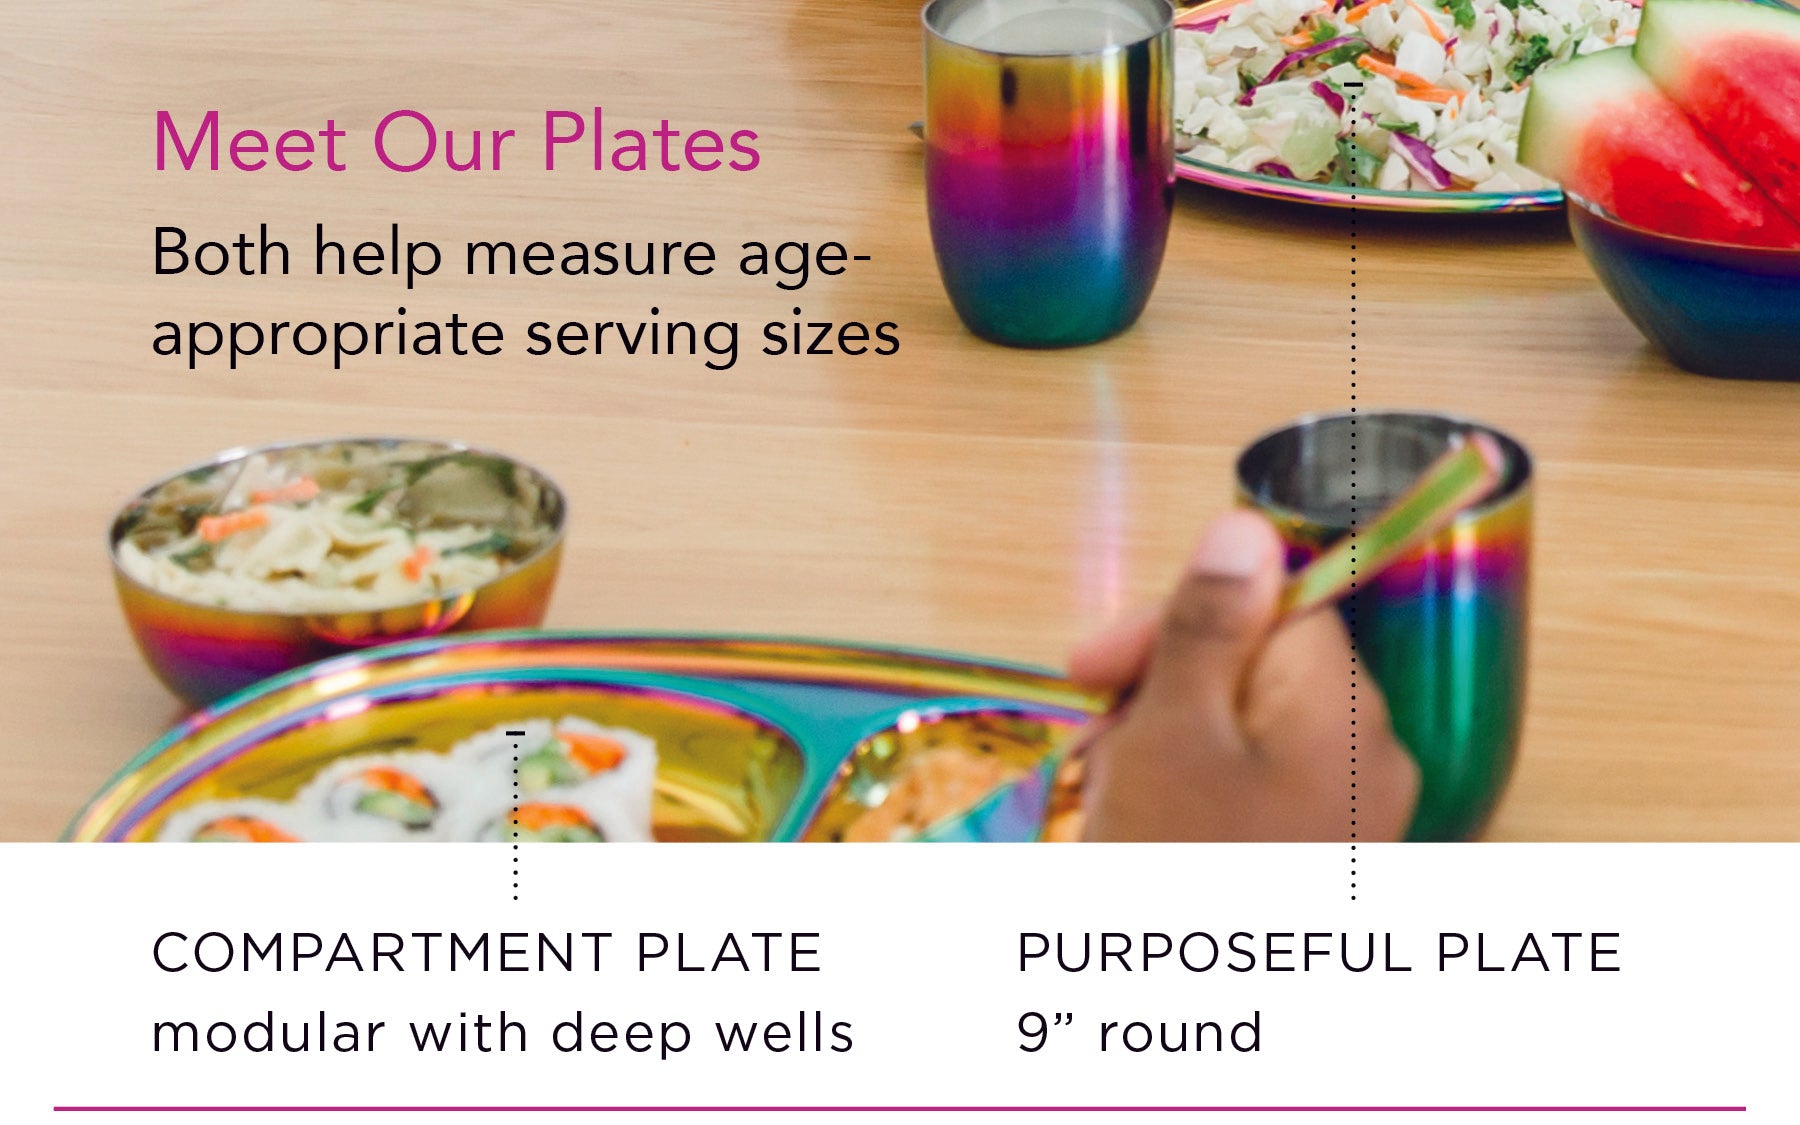 Meet Ahimsa's Plates! Purposeful plates measure 9" - using smaller dishes can be an effective strategy in providing age-appropriate portions. Our compartment plates are modular in nature creating a visual guide to teach healthy variety and portions. 